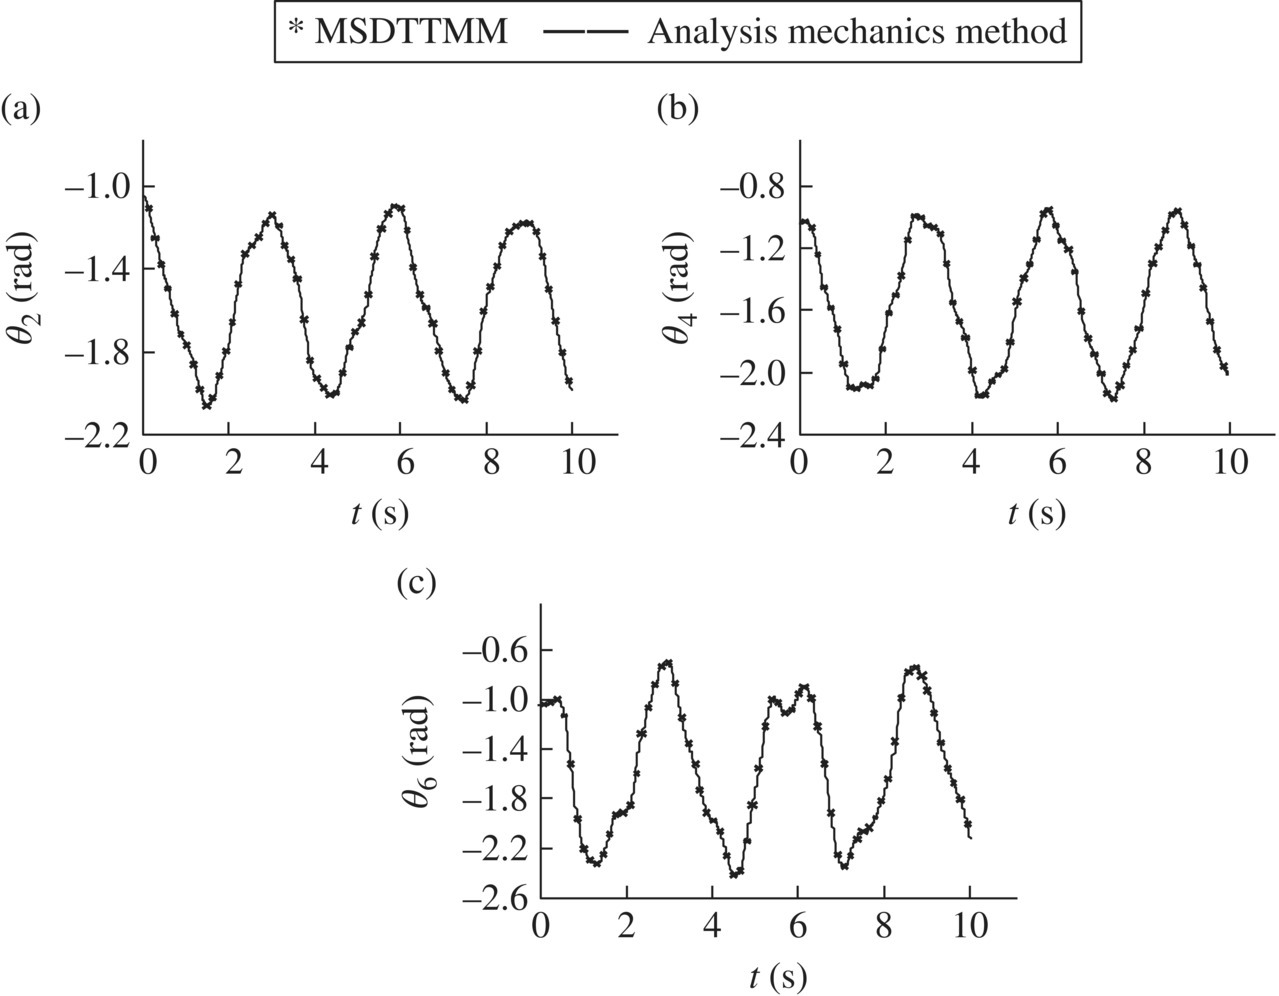 3 Graphs of orientation angle of rigid body 2 (top left), rigid body 4 (top right), and rigid body 6 (bottom), each with 2 coinciding waves representing MSDTTMM (asterisk) and analysis mechanism method (solid line).